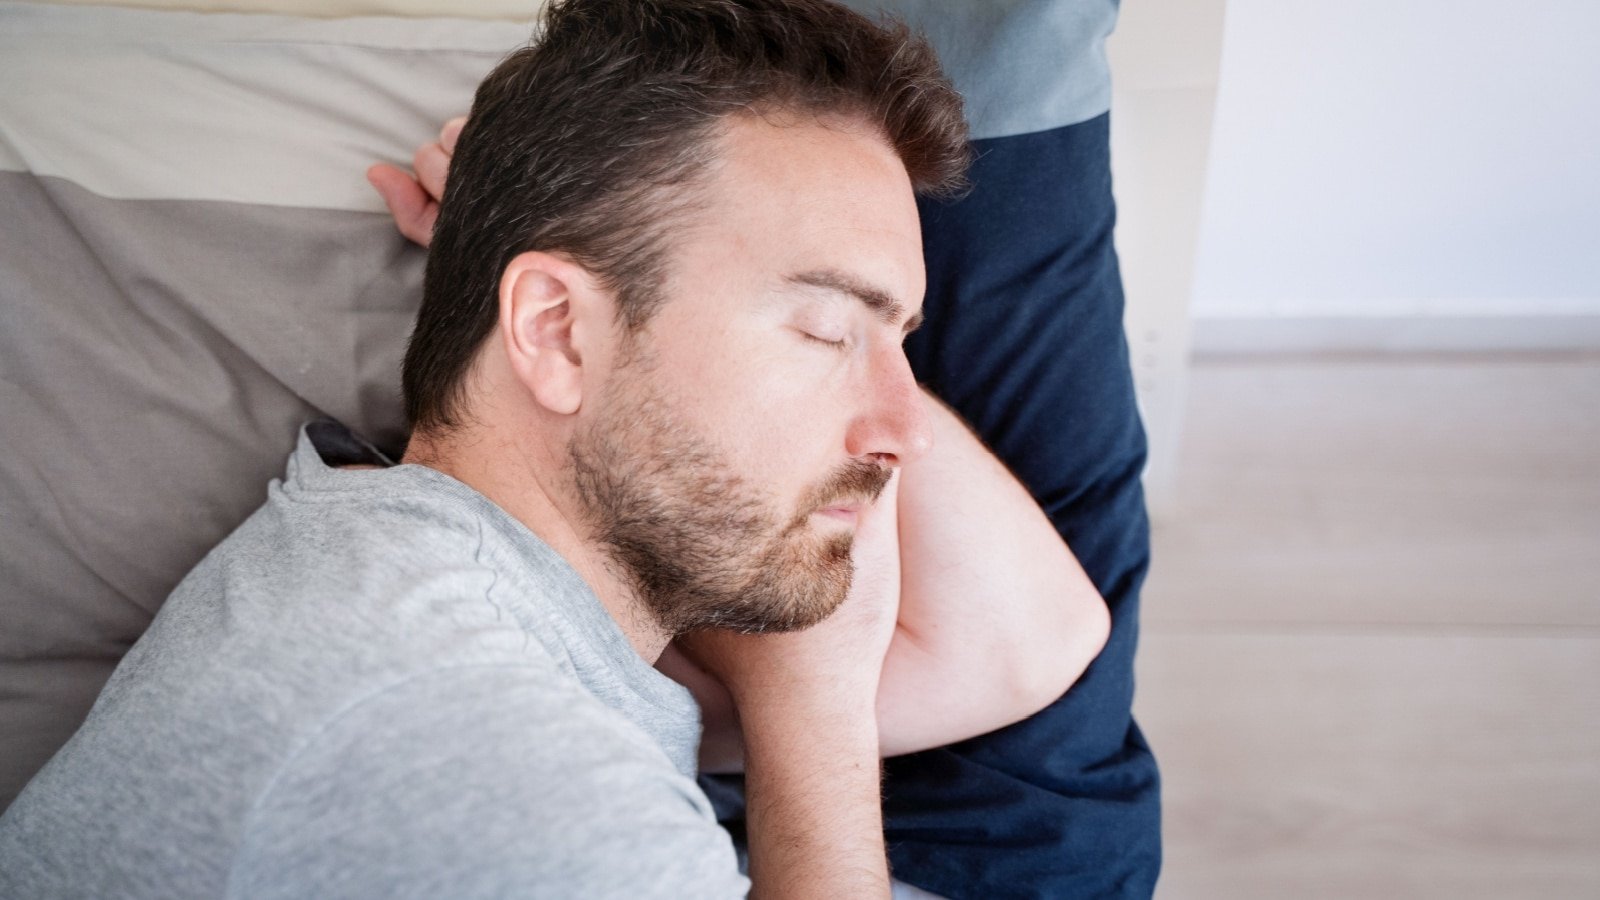 <p>Avoid sleeping on your back as it causes the tongue to block the airway. <strong><a href="https://www.hopkinsmedicine.org/health/wellness-and-prevention/choosing-the-best-sleep-position#:~:text=Positioning%20yourself%20on%20your%20side,make%20symptoms%20worse%2C%20Salas%20says." rel="noopener">Try sleeping on your side</a></strong>, supported by a body pillow or with a small fanny pack filled with tennis balls attached to your back to discourage rolling over. Alternatively, elevate your head using an extra pillow or by raising the head of your bed.</p> <p>These changes and remedies can be effective for simple snoring. However, if you suspect you have sleep apnea, it’s important to consult a doctor. </p>